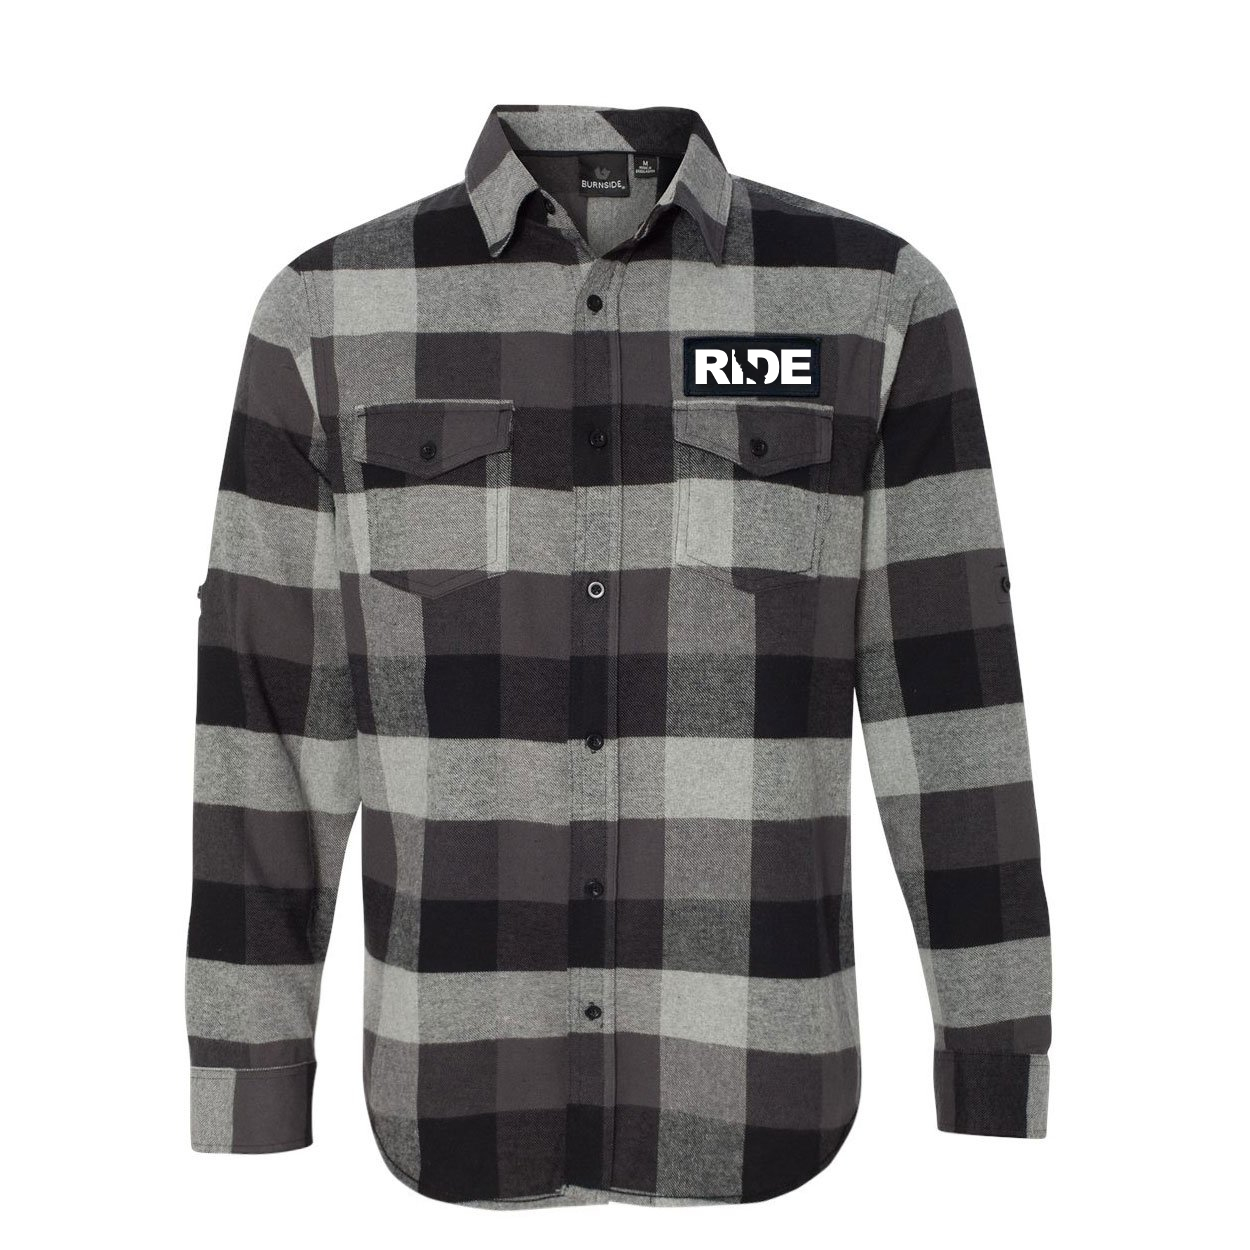 Ride California Classic Unisex Long Sleeve Woven Patch Flannel Shirt Black/Gray (White Logo)